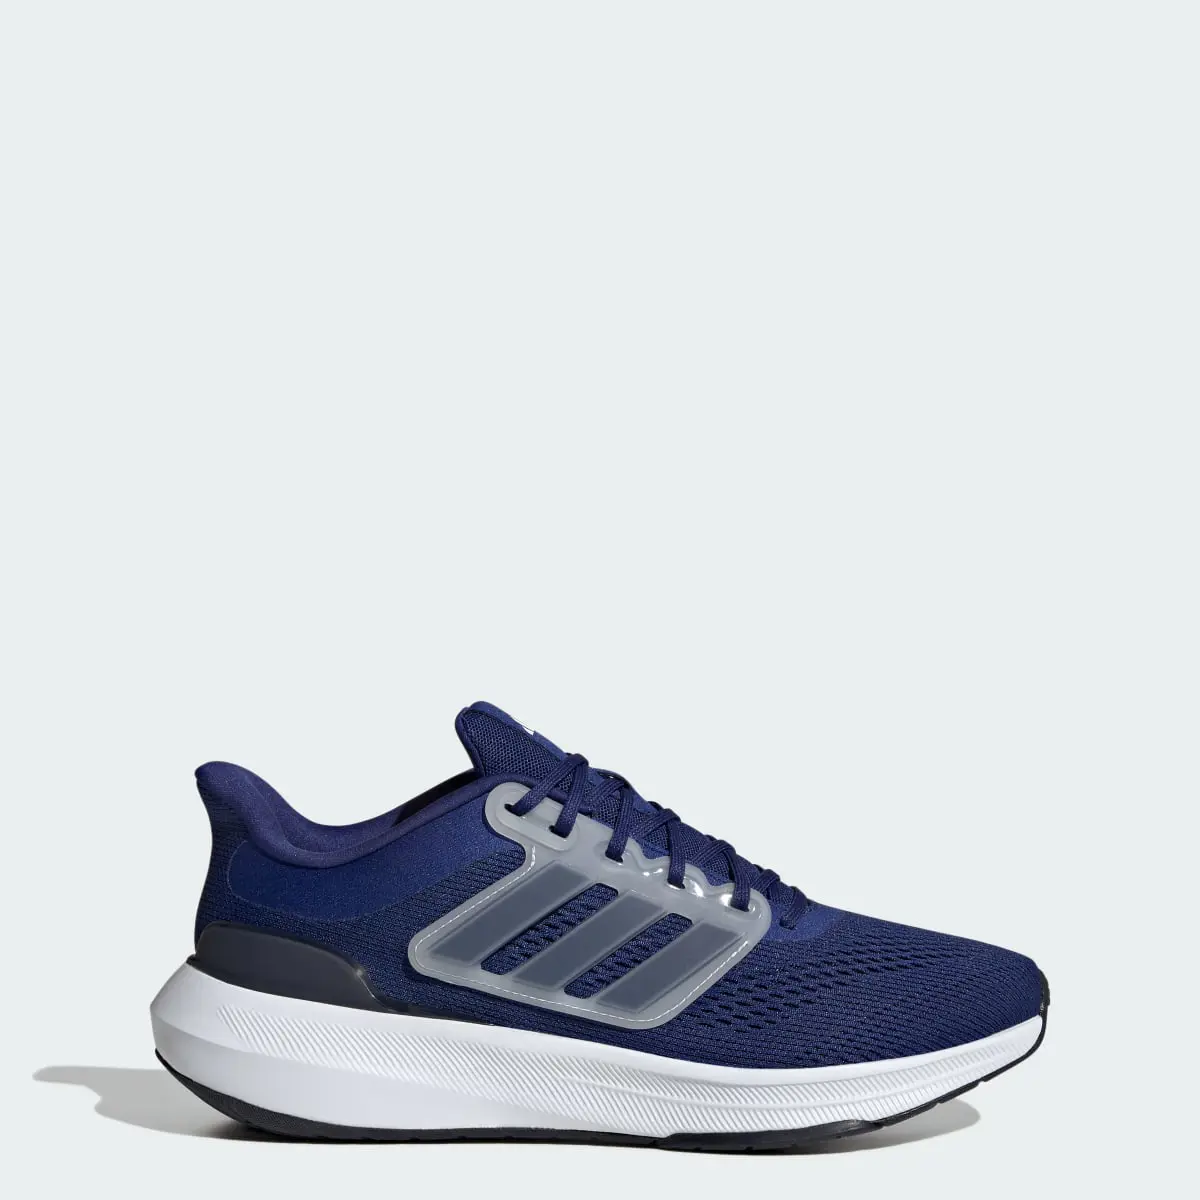 Adidas Ultrabounce Wide Shoes. 1